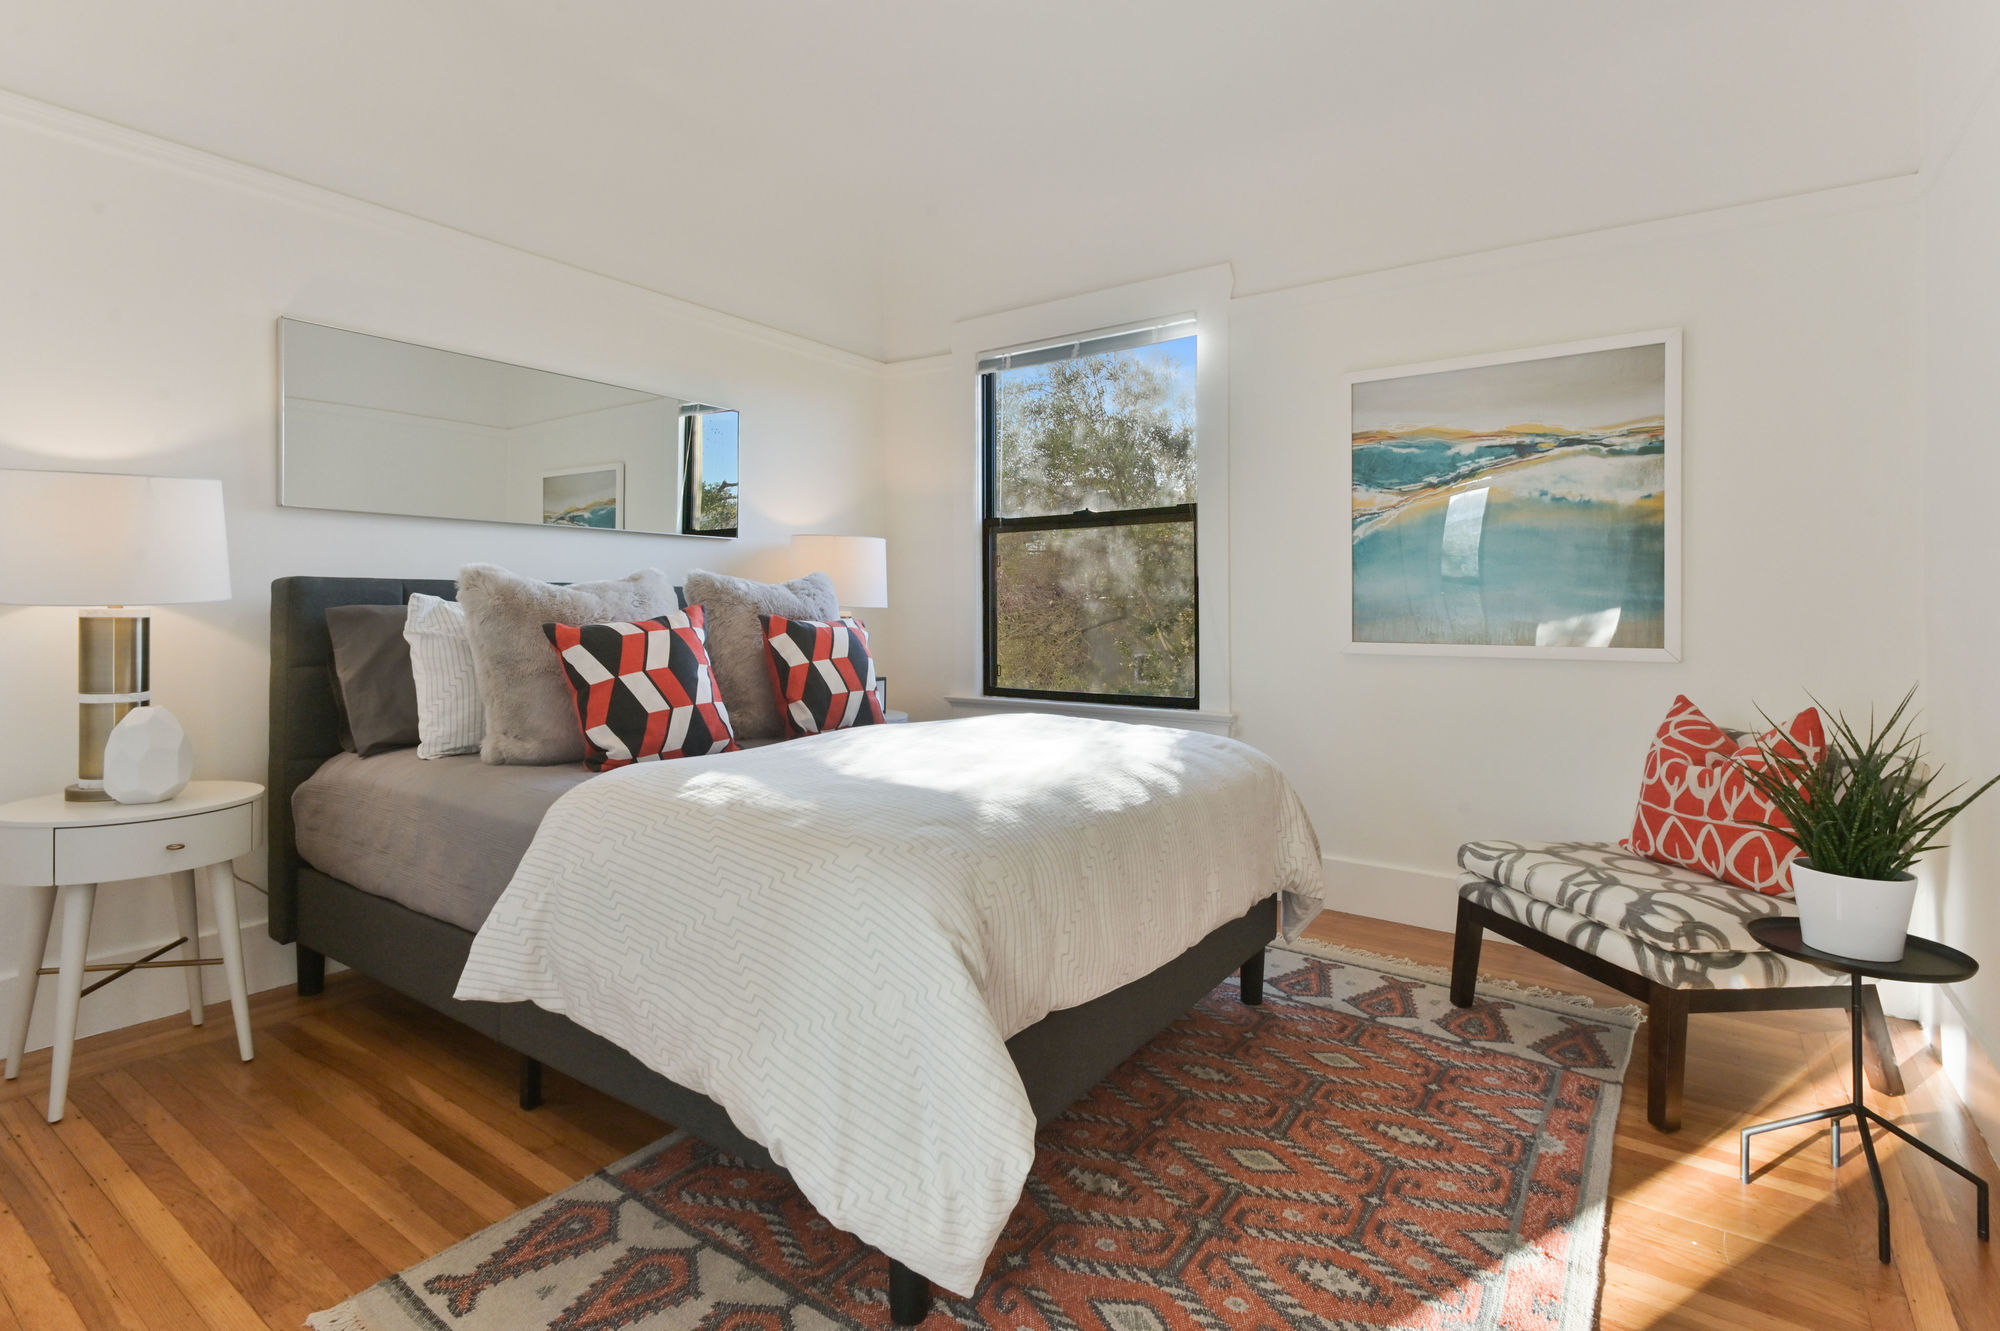 Property Photo: View of another bedroom with window and wood floors